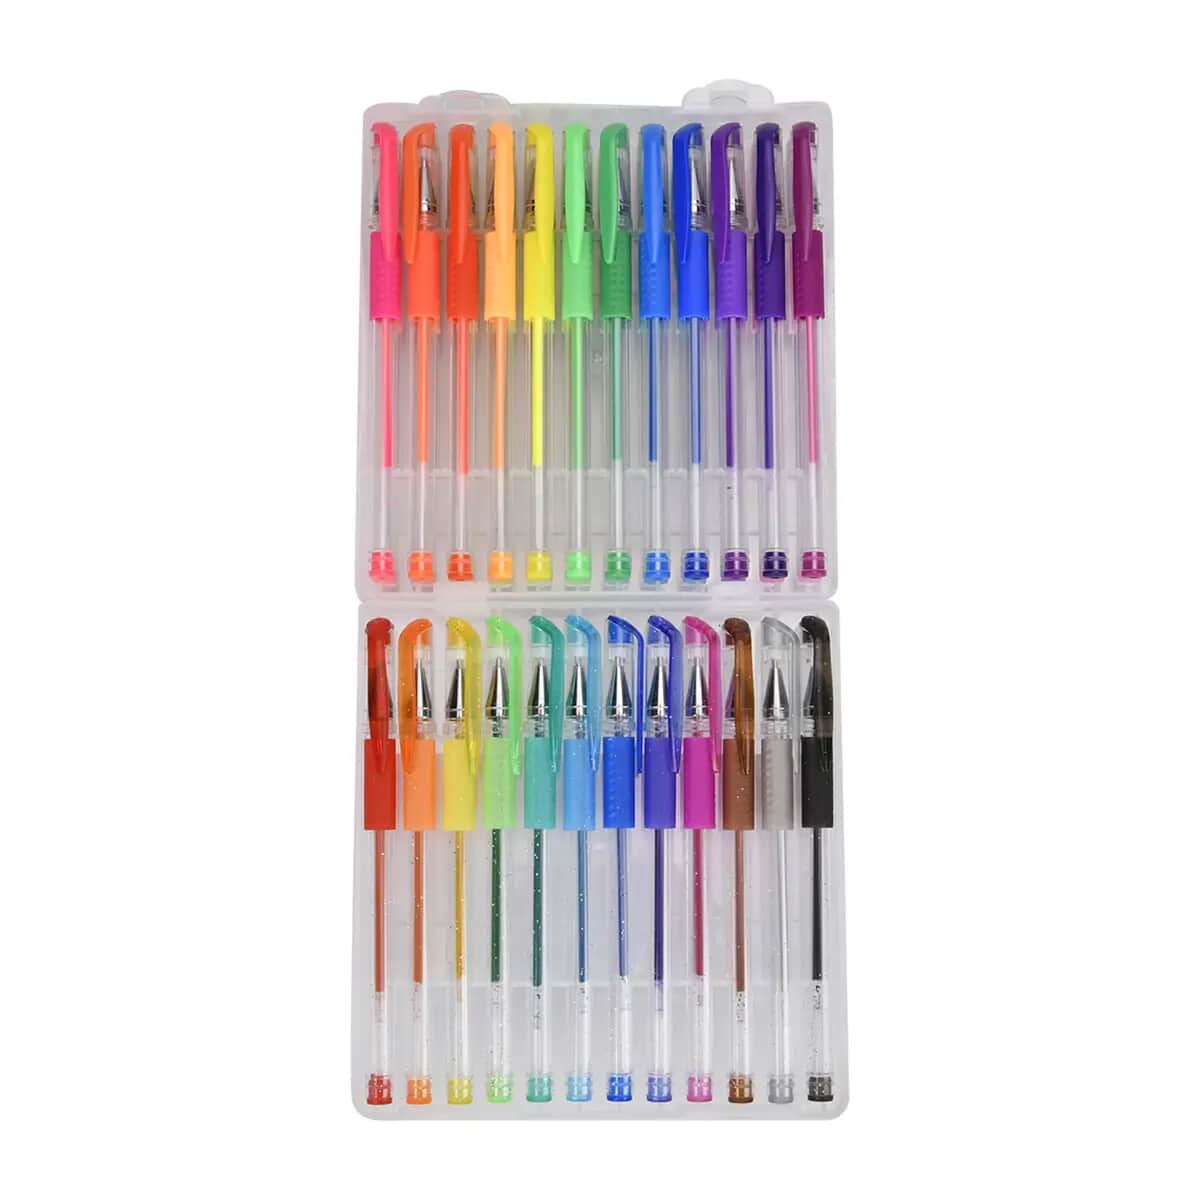 60 Pack Gel Pens Set with Storage Box for Coloring Books Drawing Painting Writing image number 0